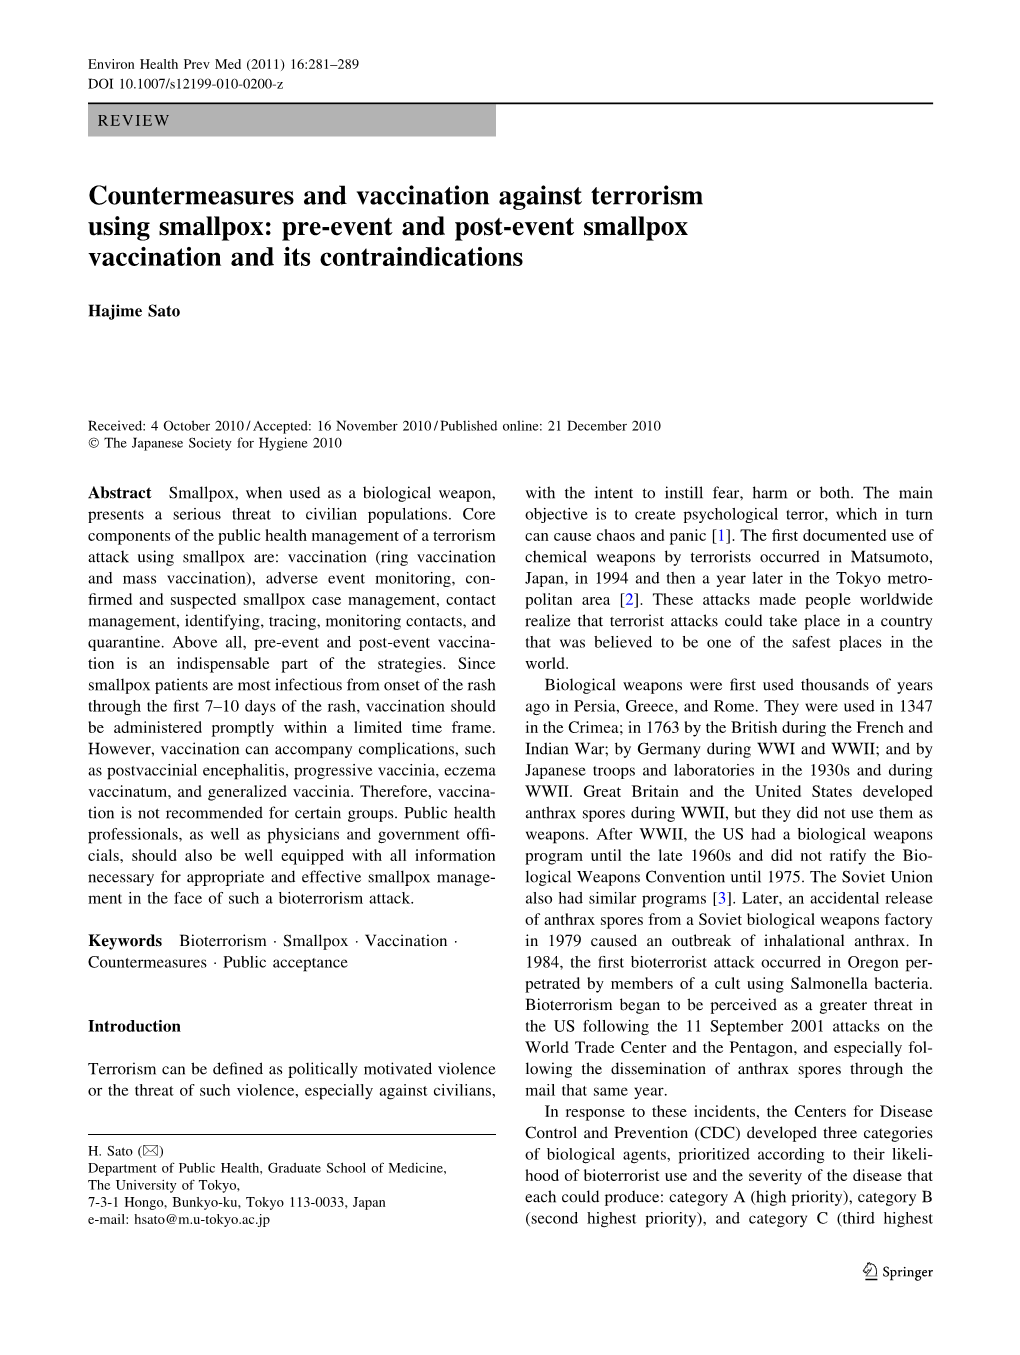 Countermeasures and Vaccination Against Terrorism Using Smallpox: Pre-Event and Post-Event Smallpox Vaccination and Its Contraindications